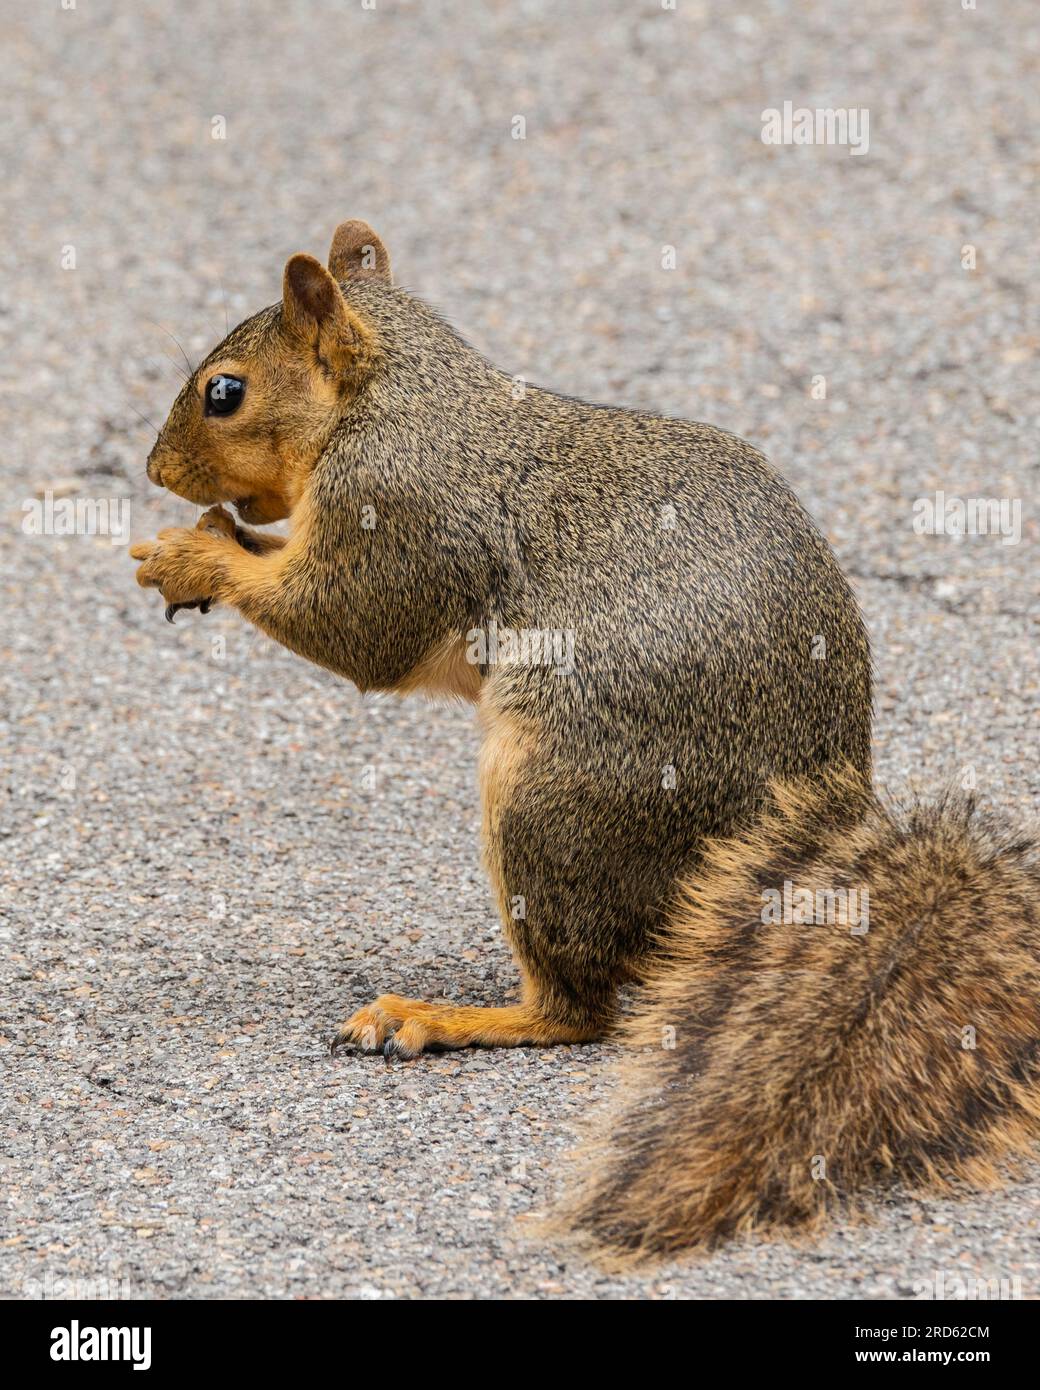 Fox squirrel, Sciurus niger, on back two feet holding a nut with front feet while eating. Wichita, Kansas, USA. Stock Photo